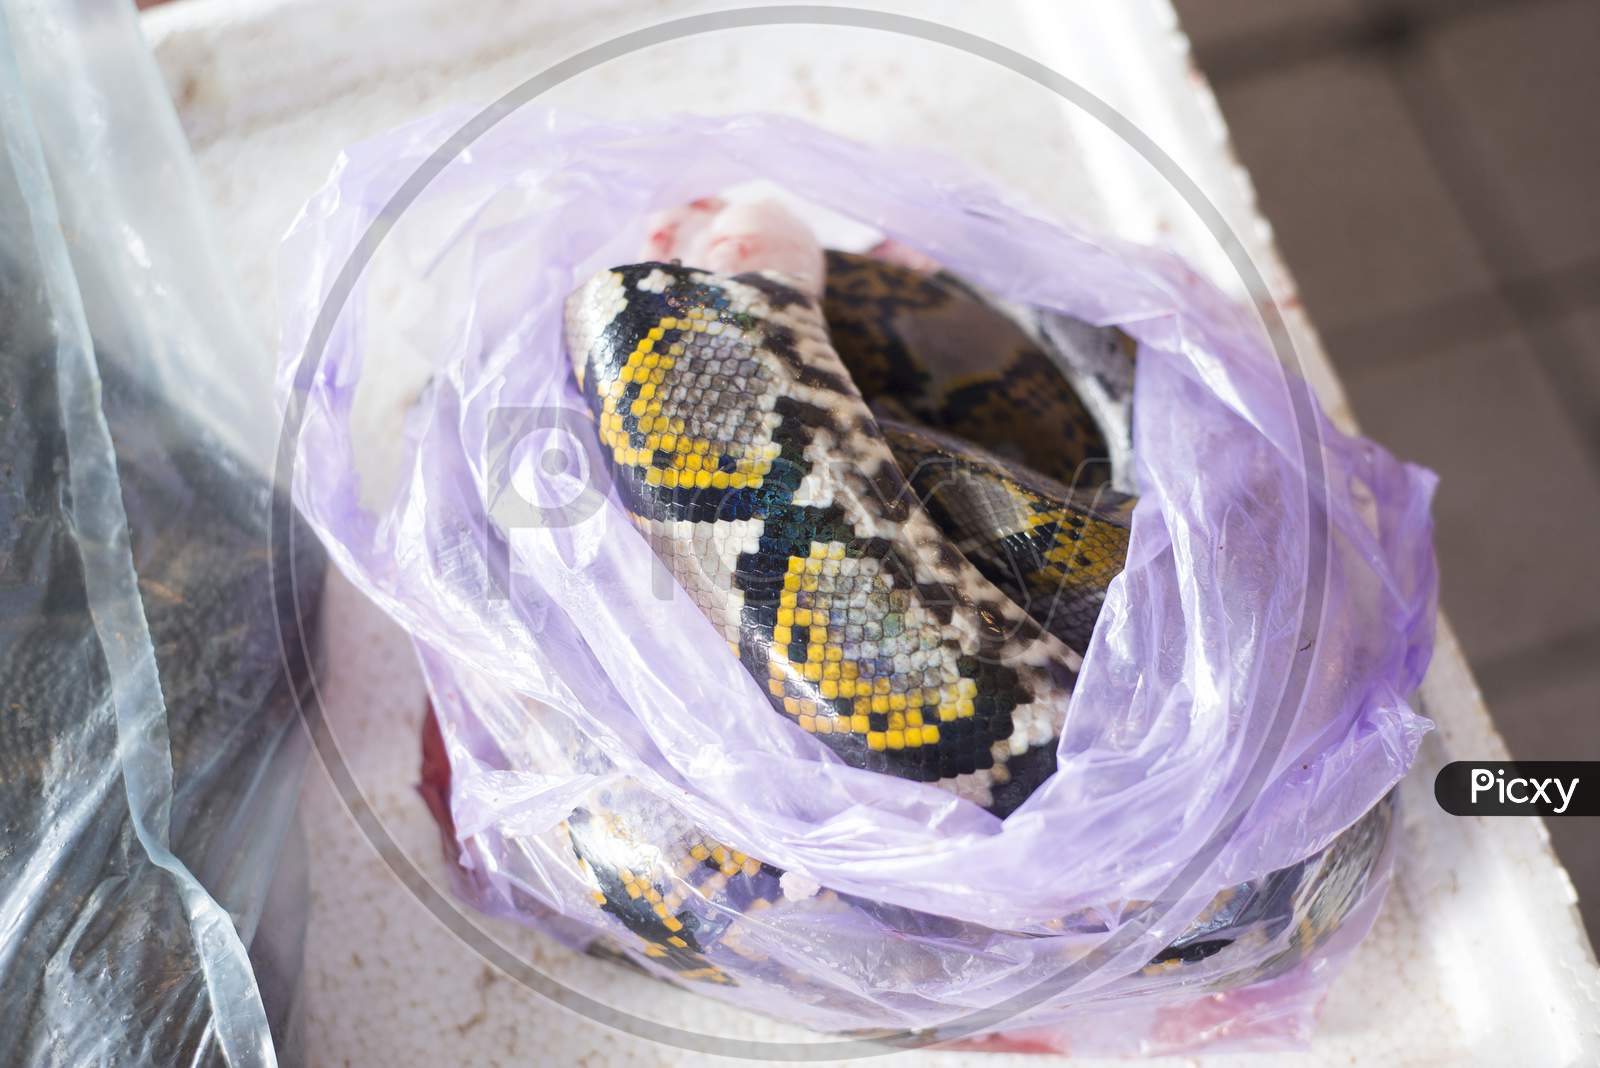 Close Up Of Snake Meat In A Plastic Bag For Sale In A Market In Malaysia, Now To Be Known To Be The Cause Of The Corona Virus